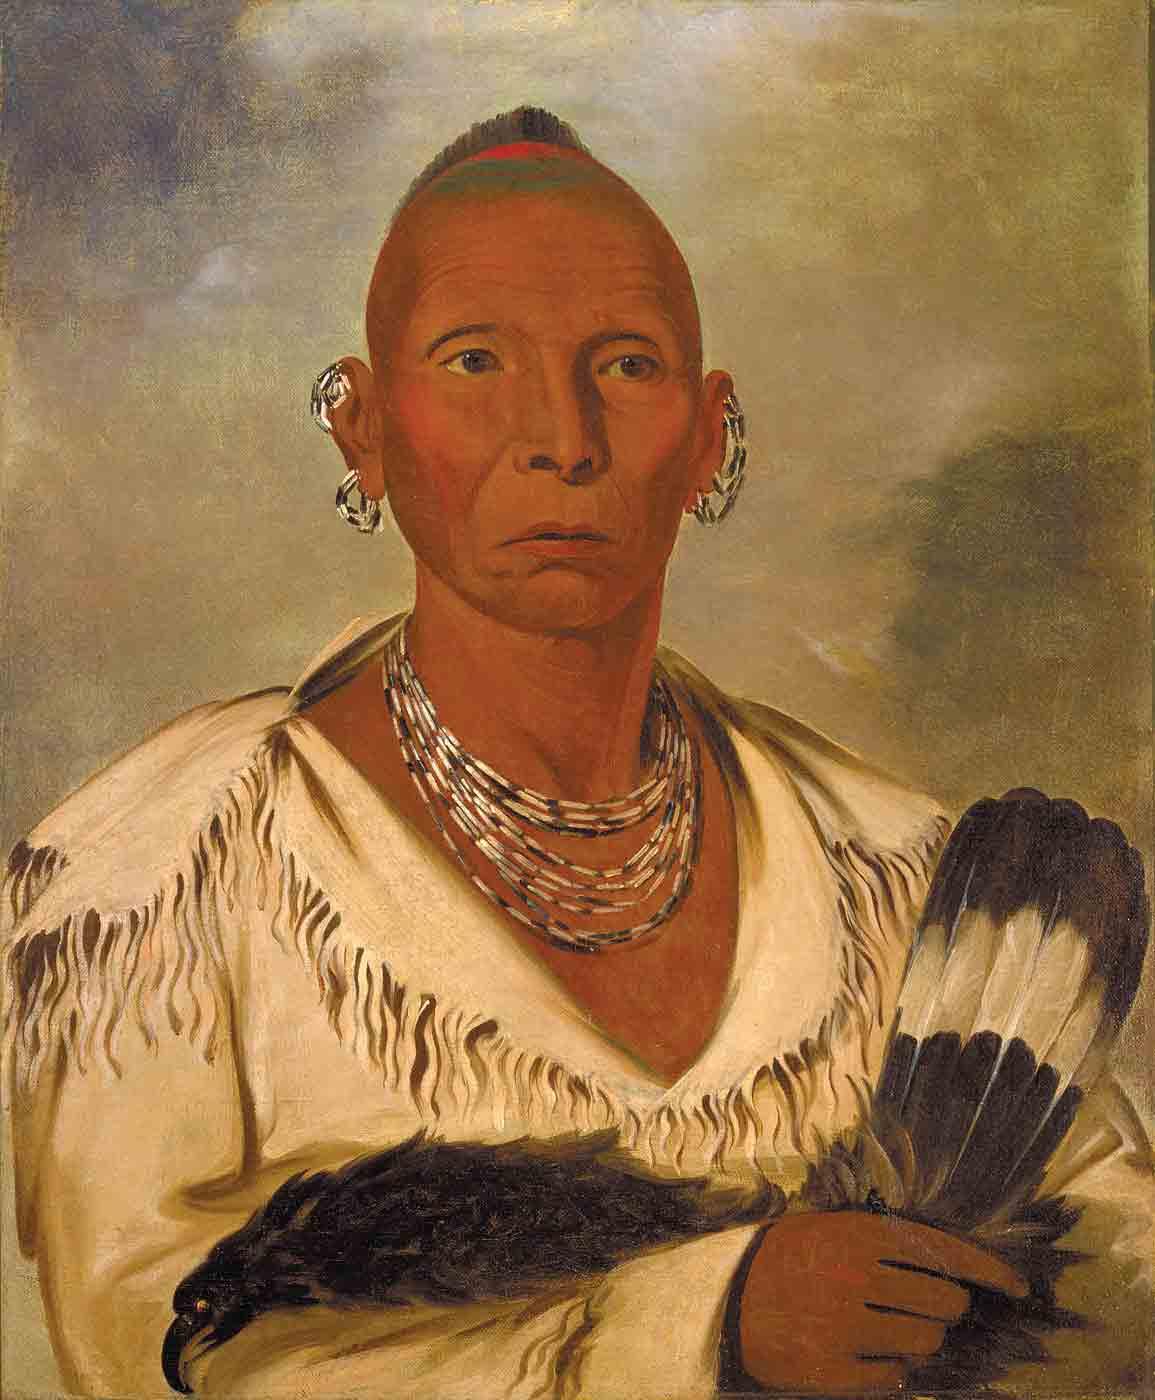 Portrait of Black Hawk, leader of the Sauk tribe, painted by George Catlin